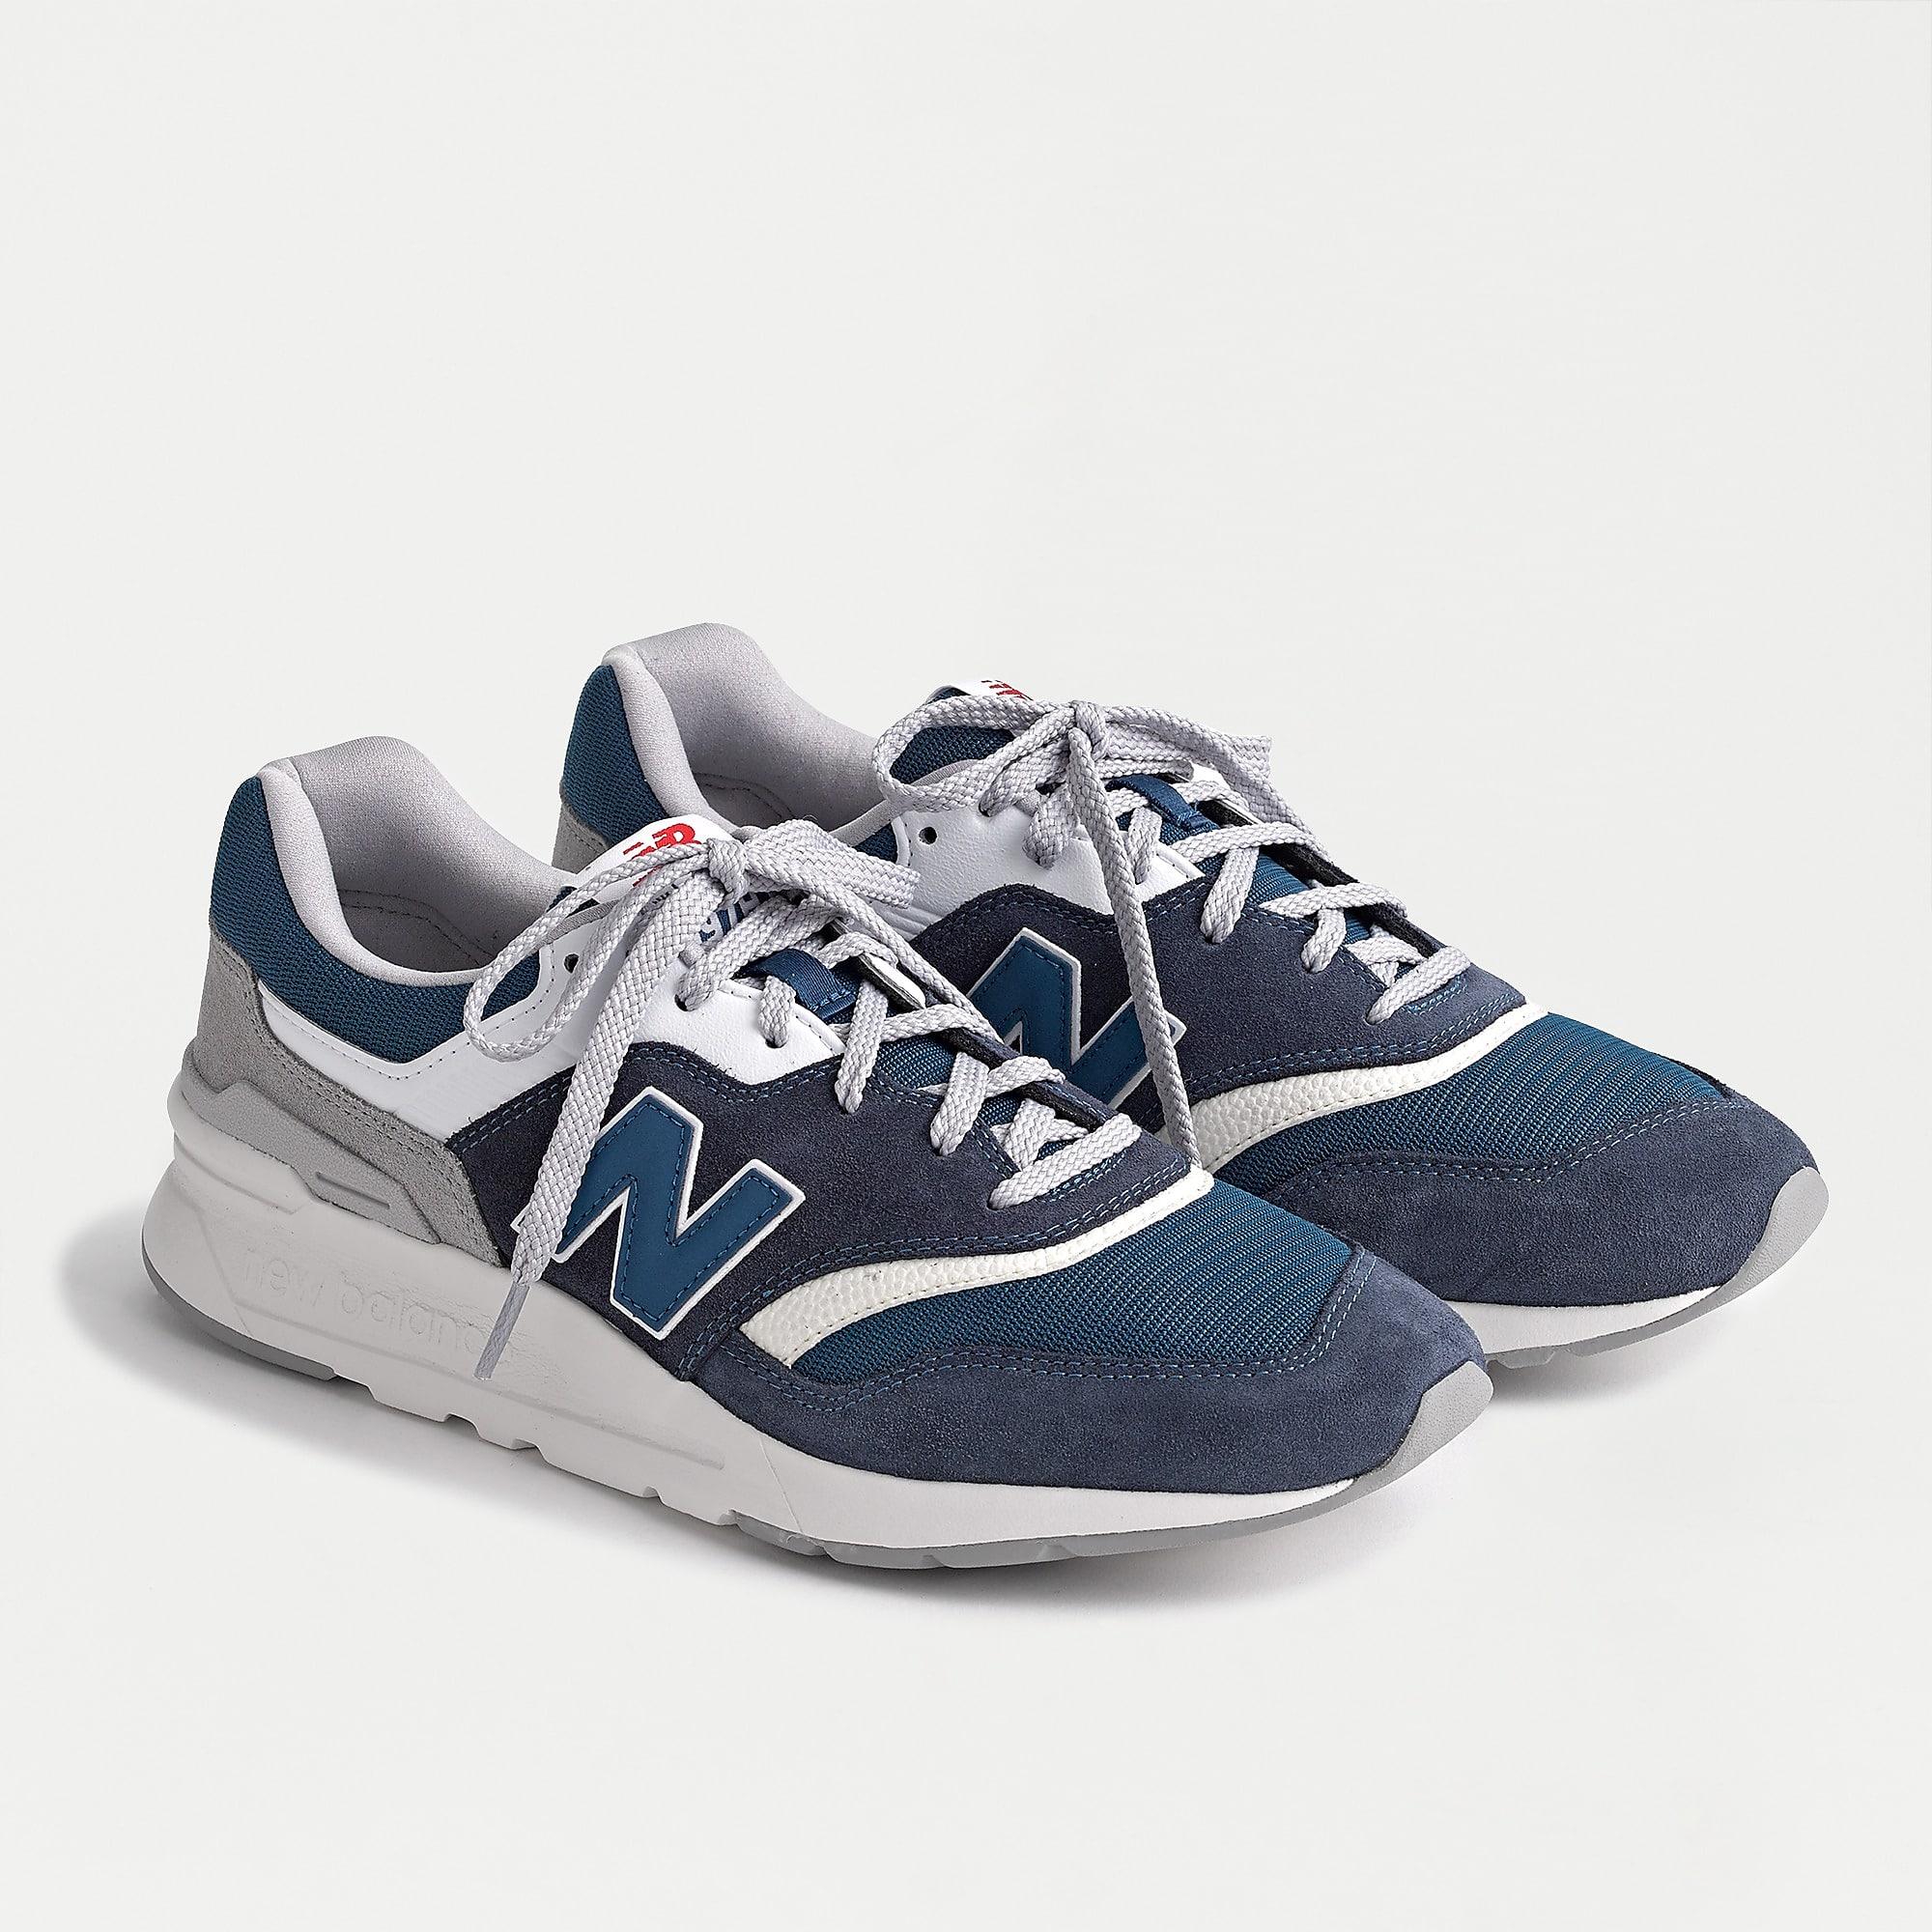 New Balance Suede 997h Sneakers in Blue for Men - Lyst